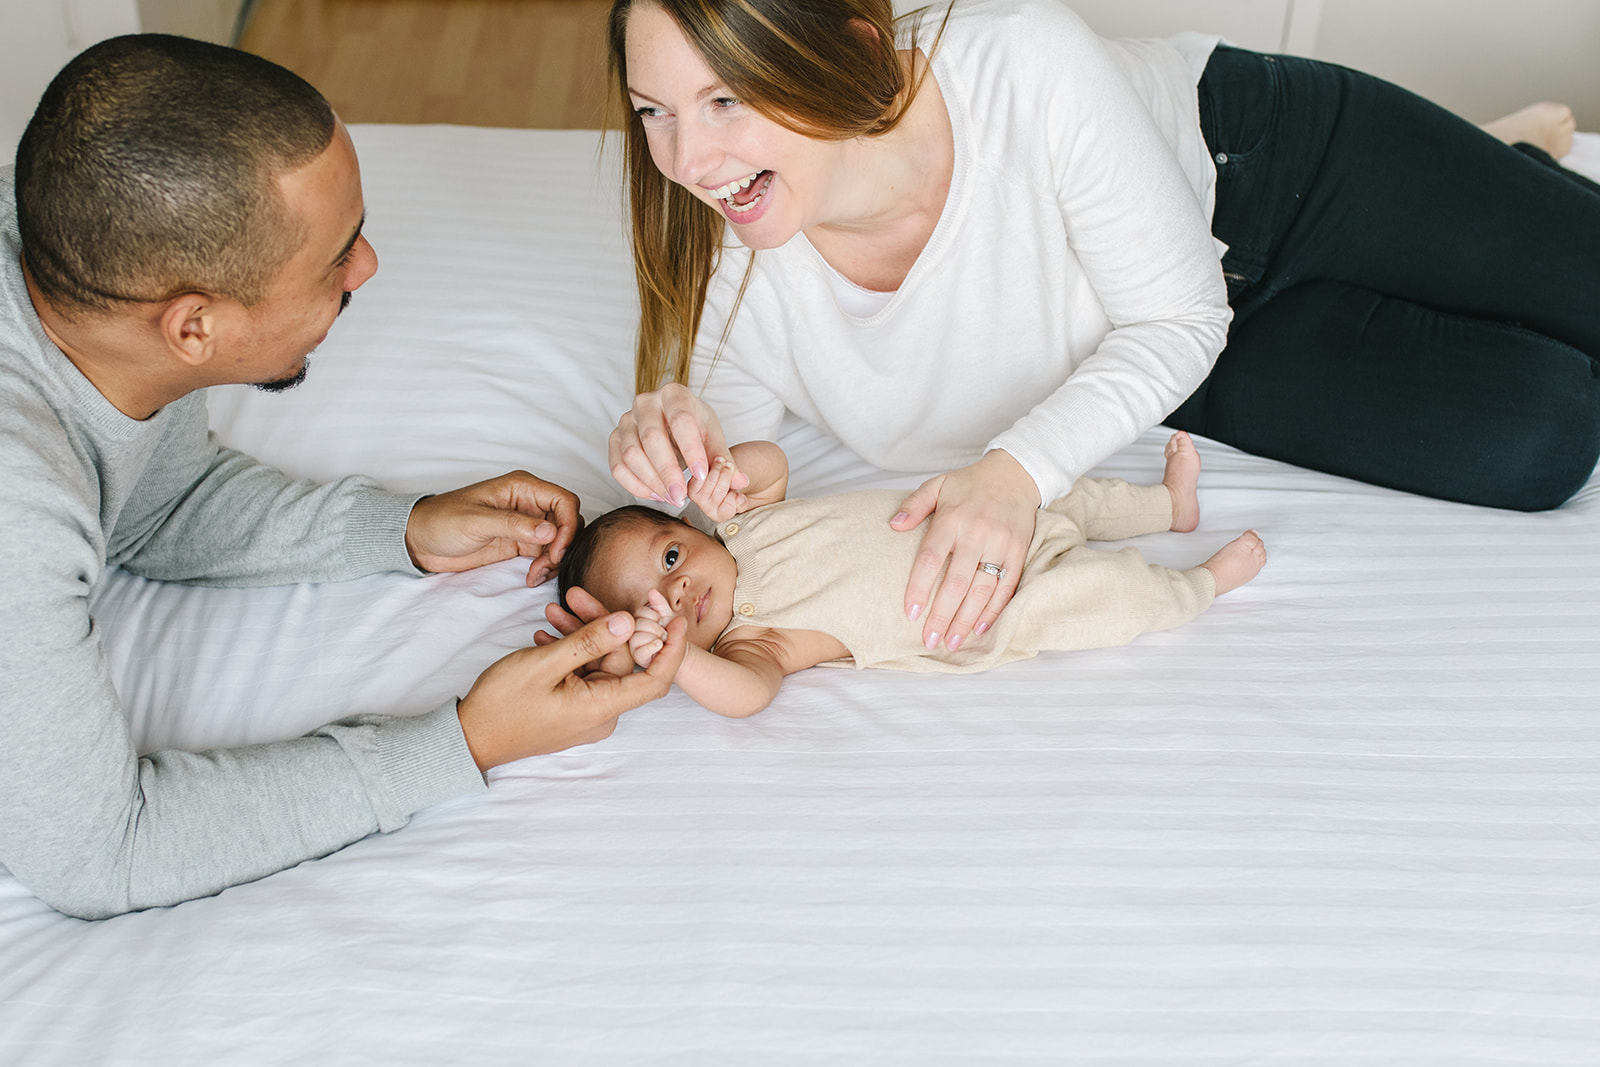 newborn baby lays on a white bed in a tan onesie while mom and dad play with it